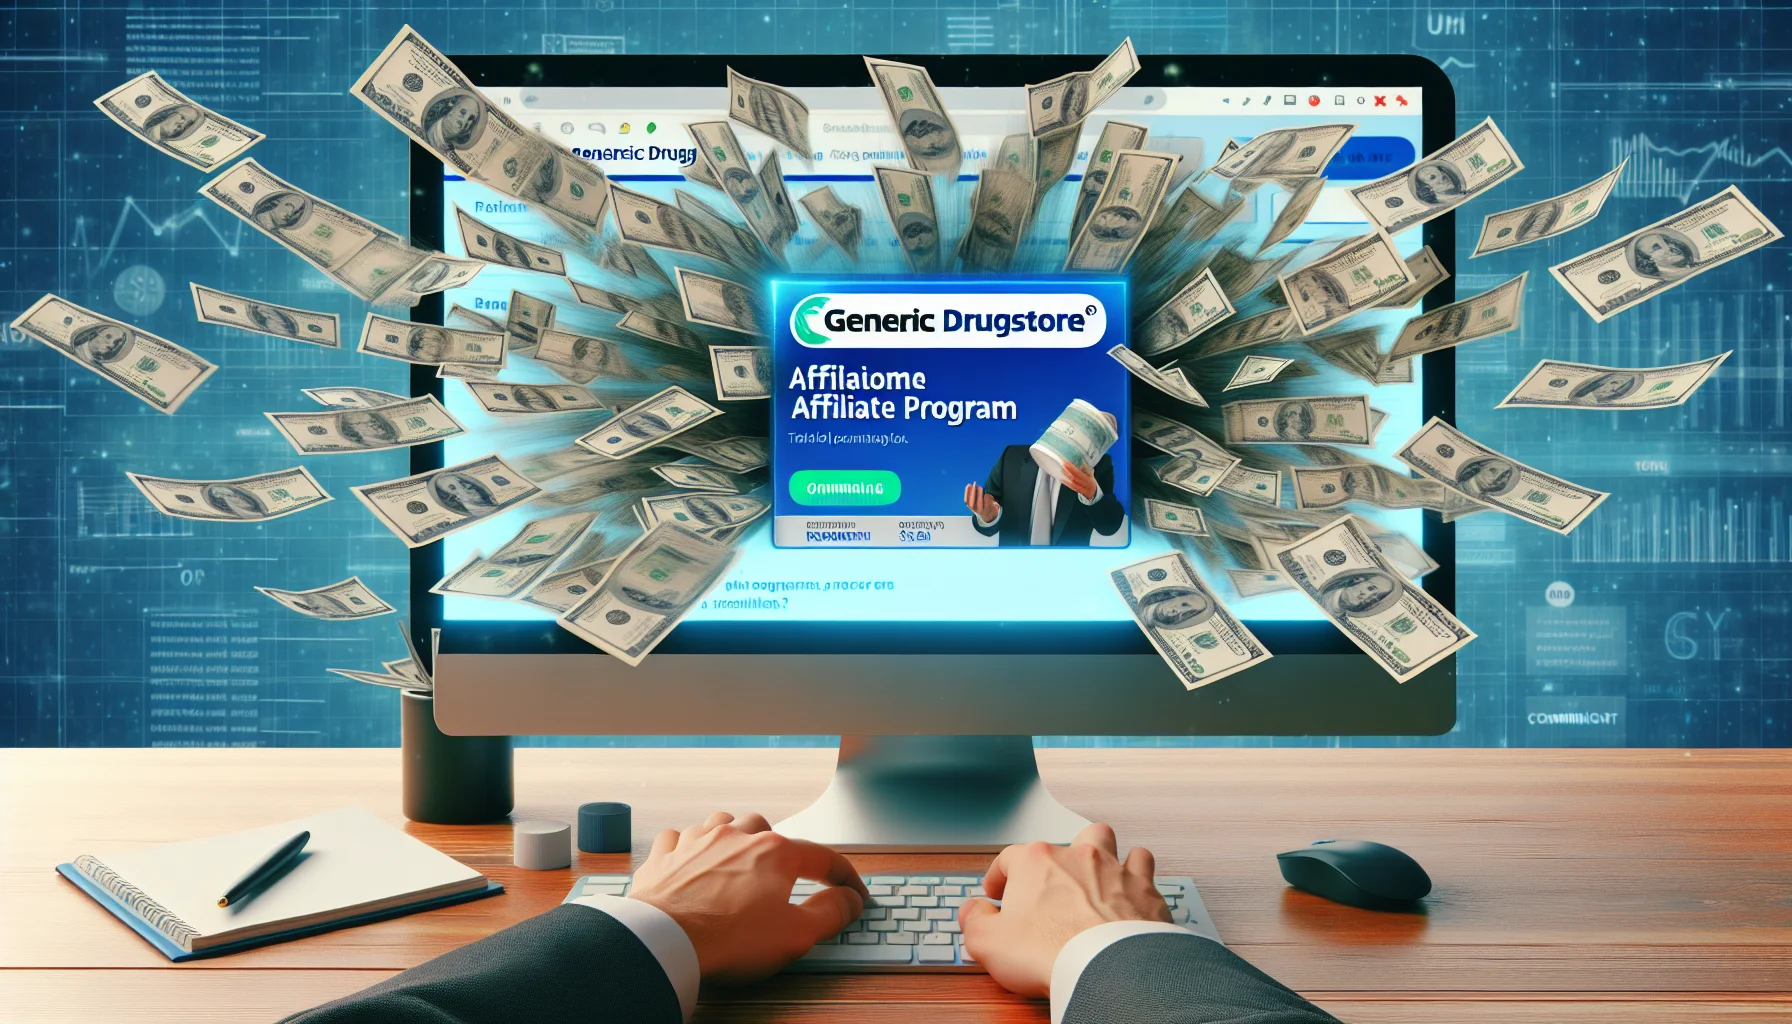 Create a humorous yet detailed scene of a lucrative online venture. Visualize a generic drugstore's affiliate program prominently displayed on a digital platform screen such as a computer or smartphone. Waves of cash are flowing out from the screen, involving the viewer in the prospect of earning money online. There's a distinct digital aesthetic and clear depictions of affiliate marketing elements like referral links and commission percentages.